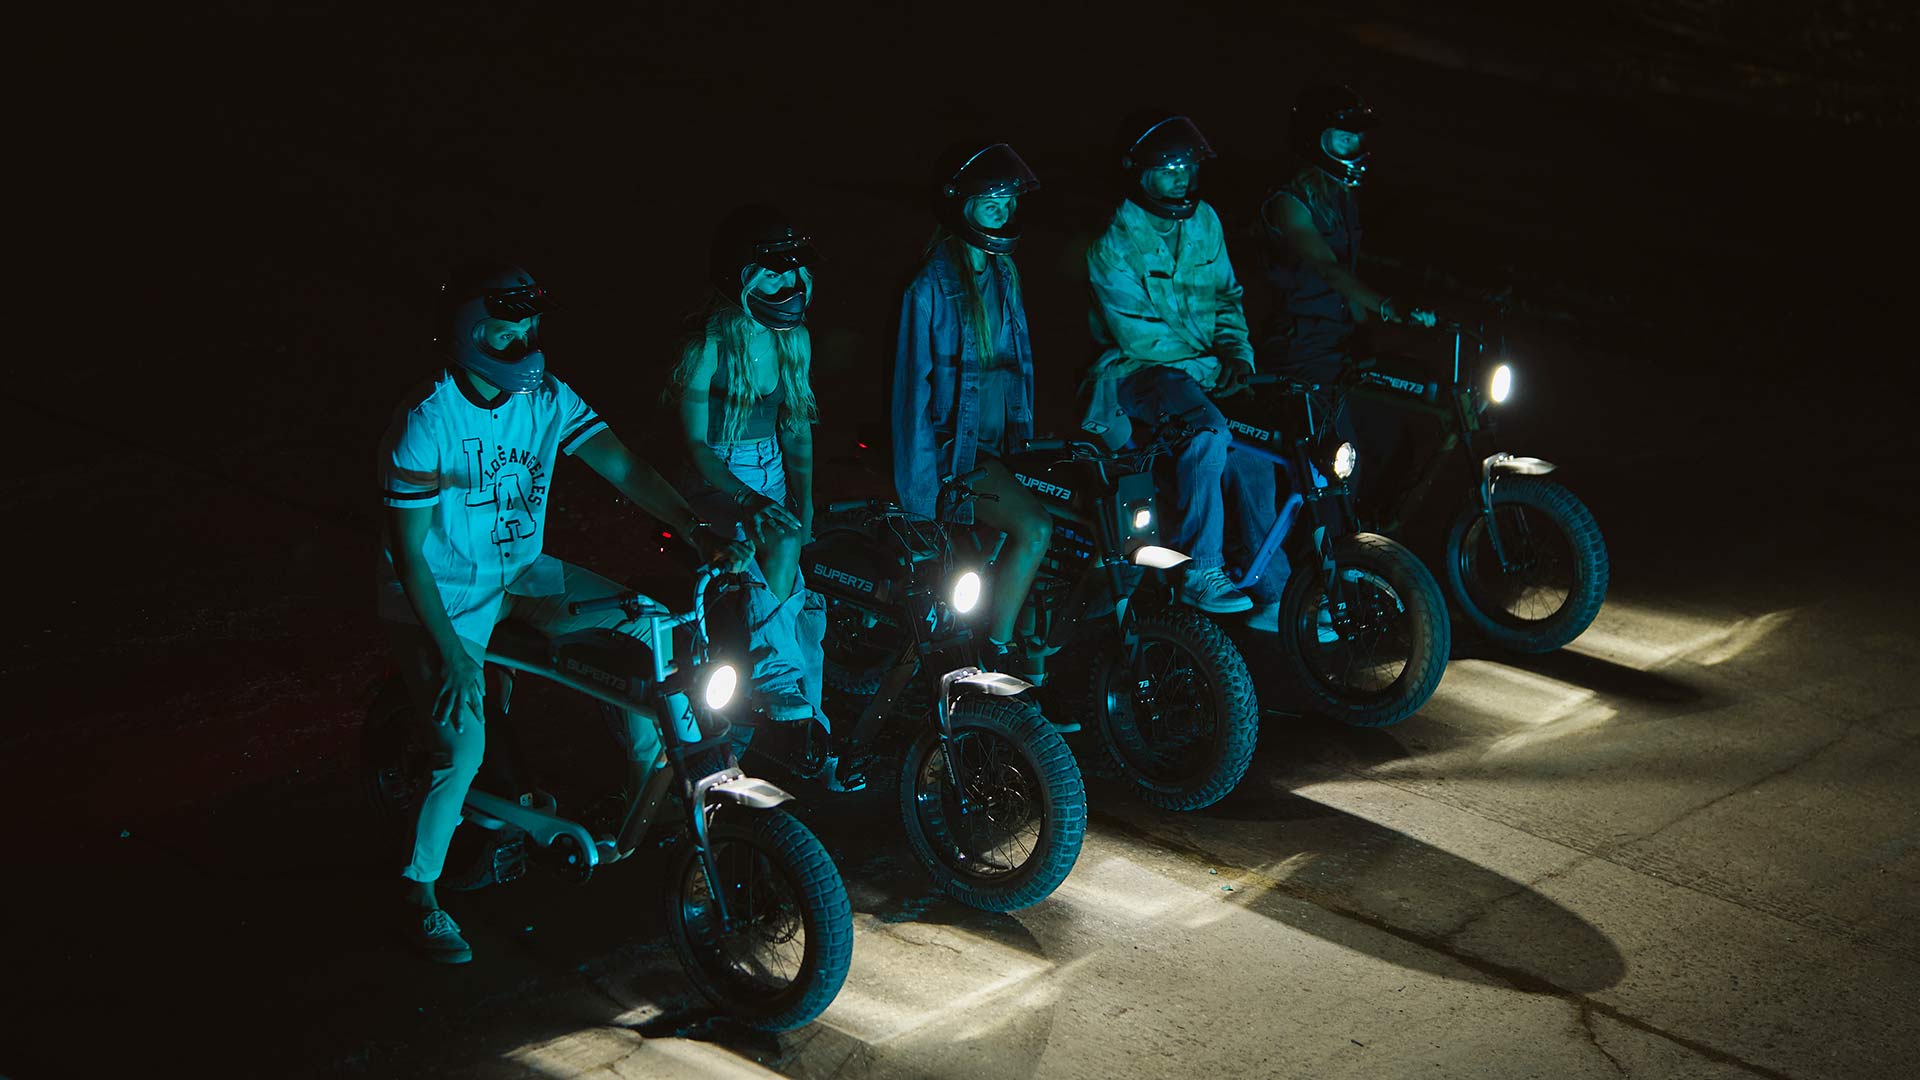 Super73 ebike riders lined up in the dark with headlamps on